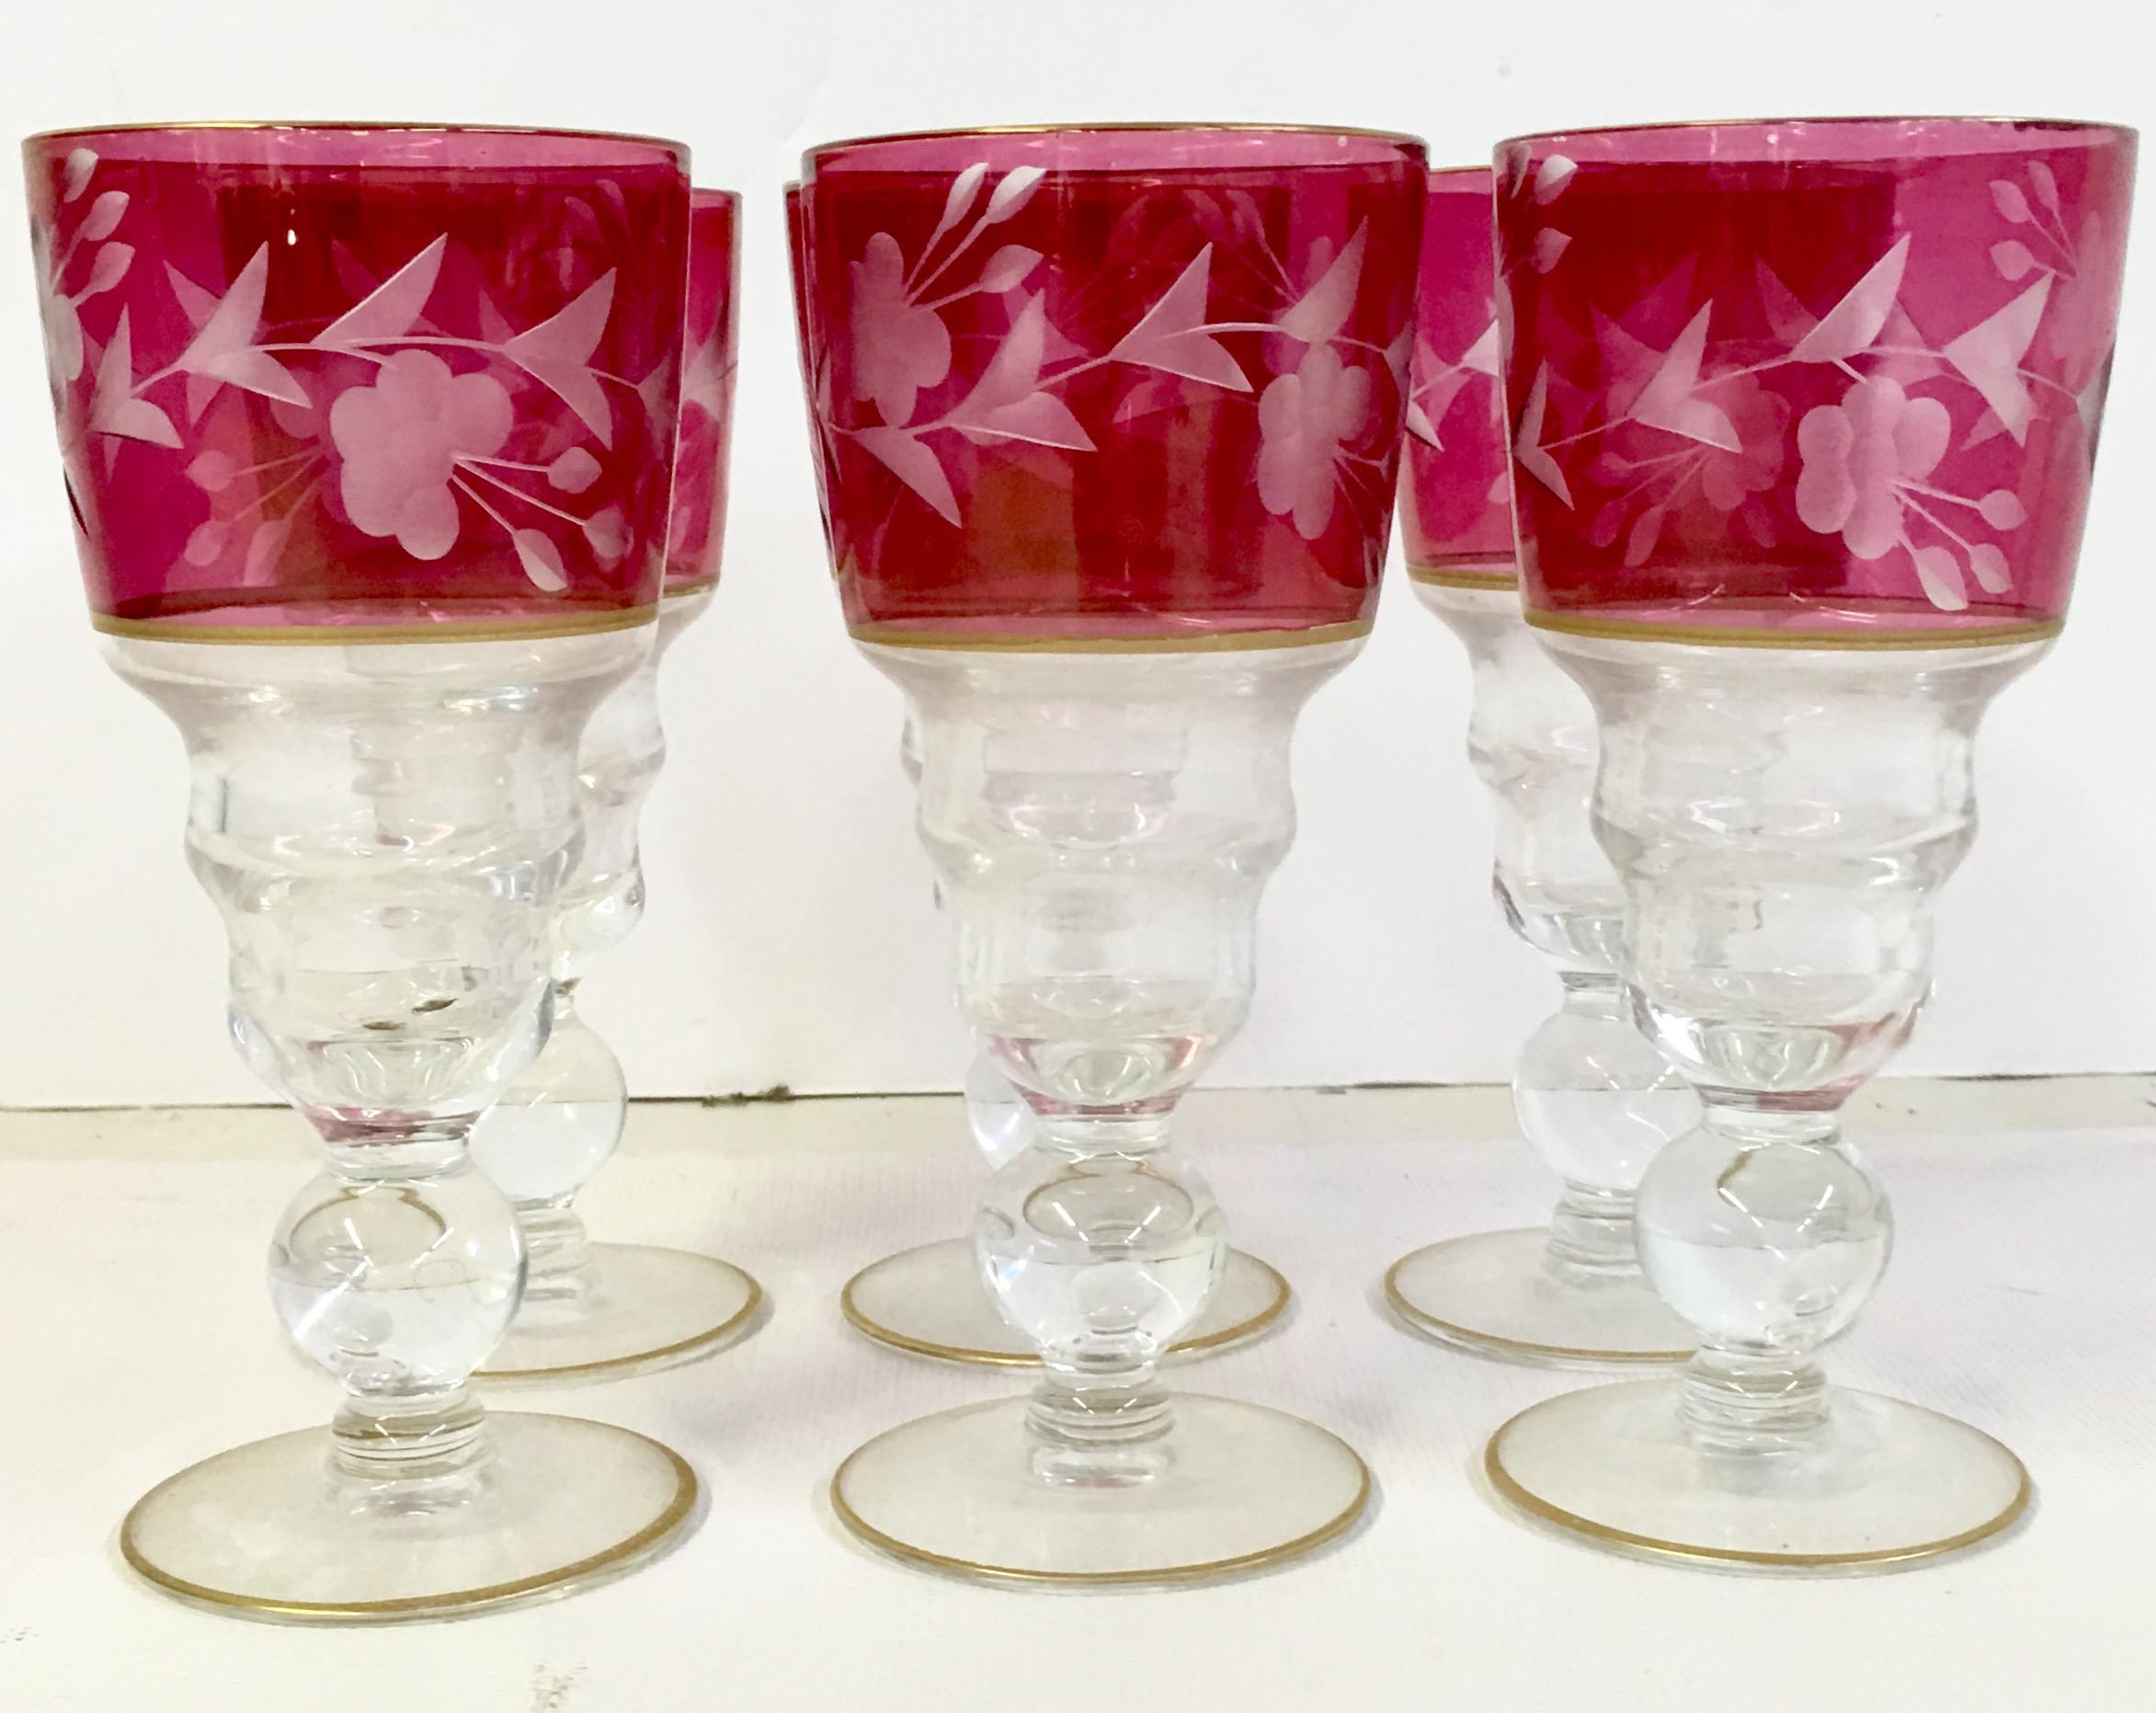 Mid-20th century etched crystal and 22-karat gold cordial drink glasses set of six pieces. Features a
floral vine motif with 22-karat gold cup and foot rim detail.